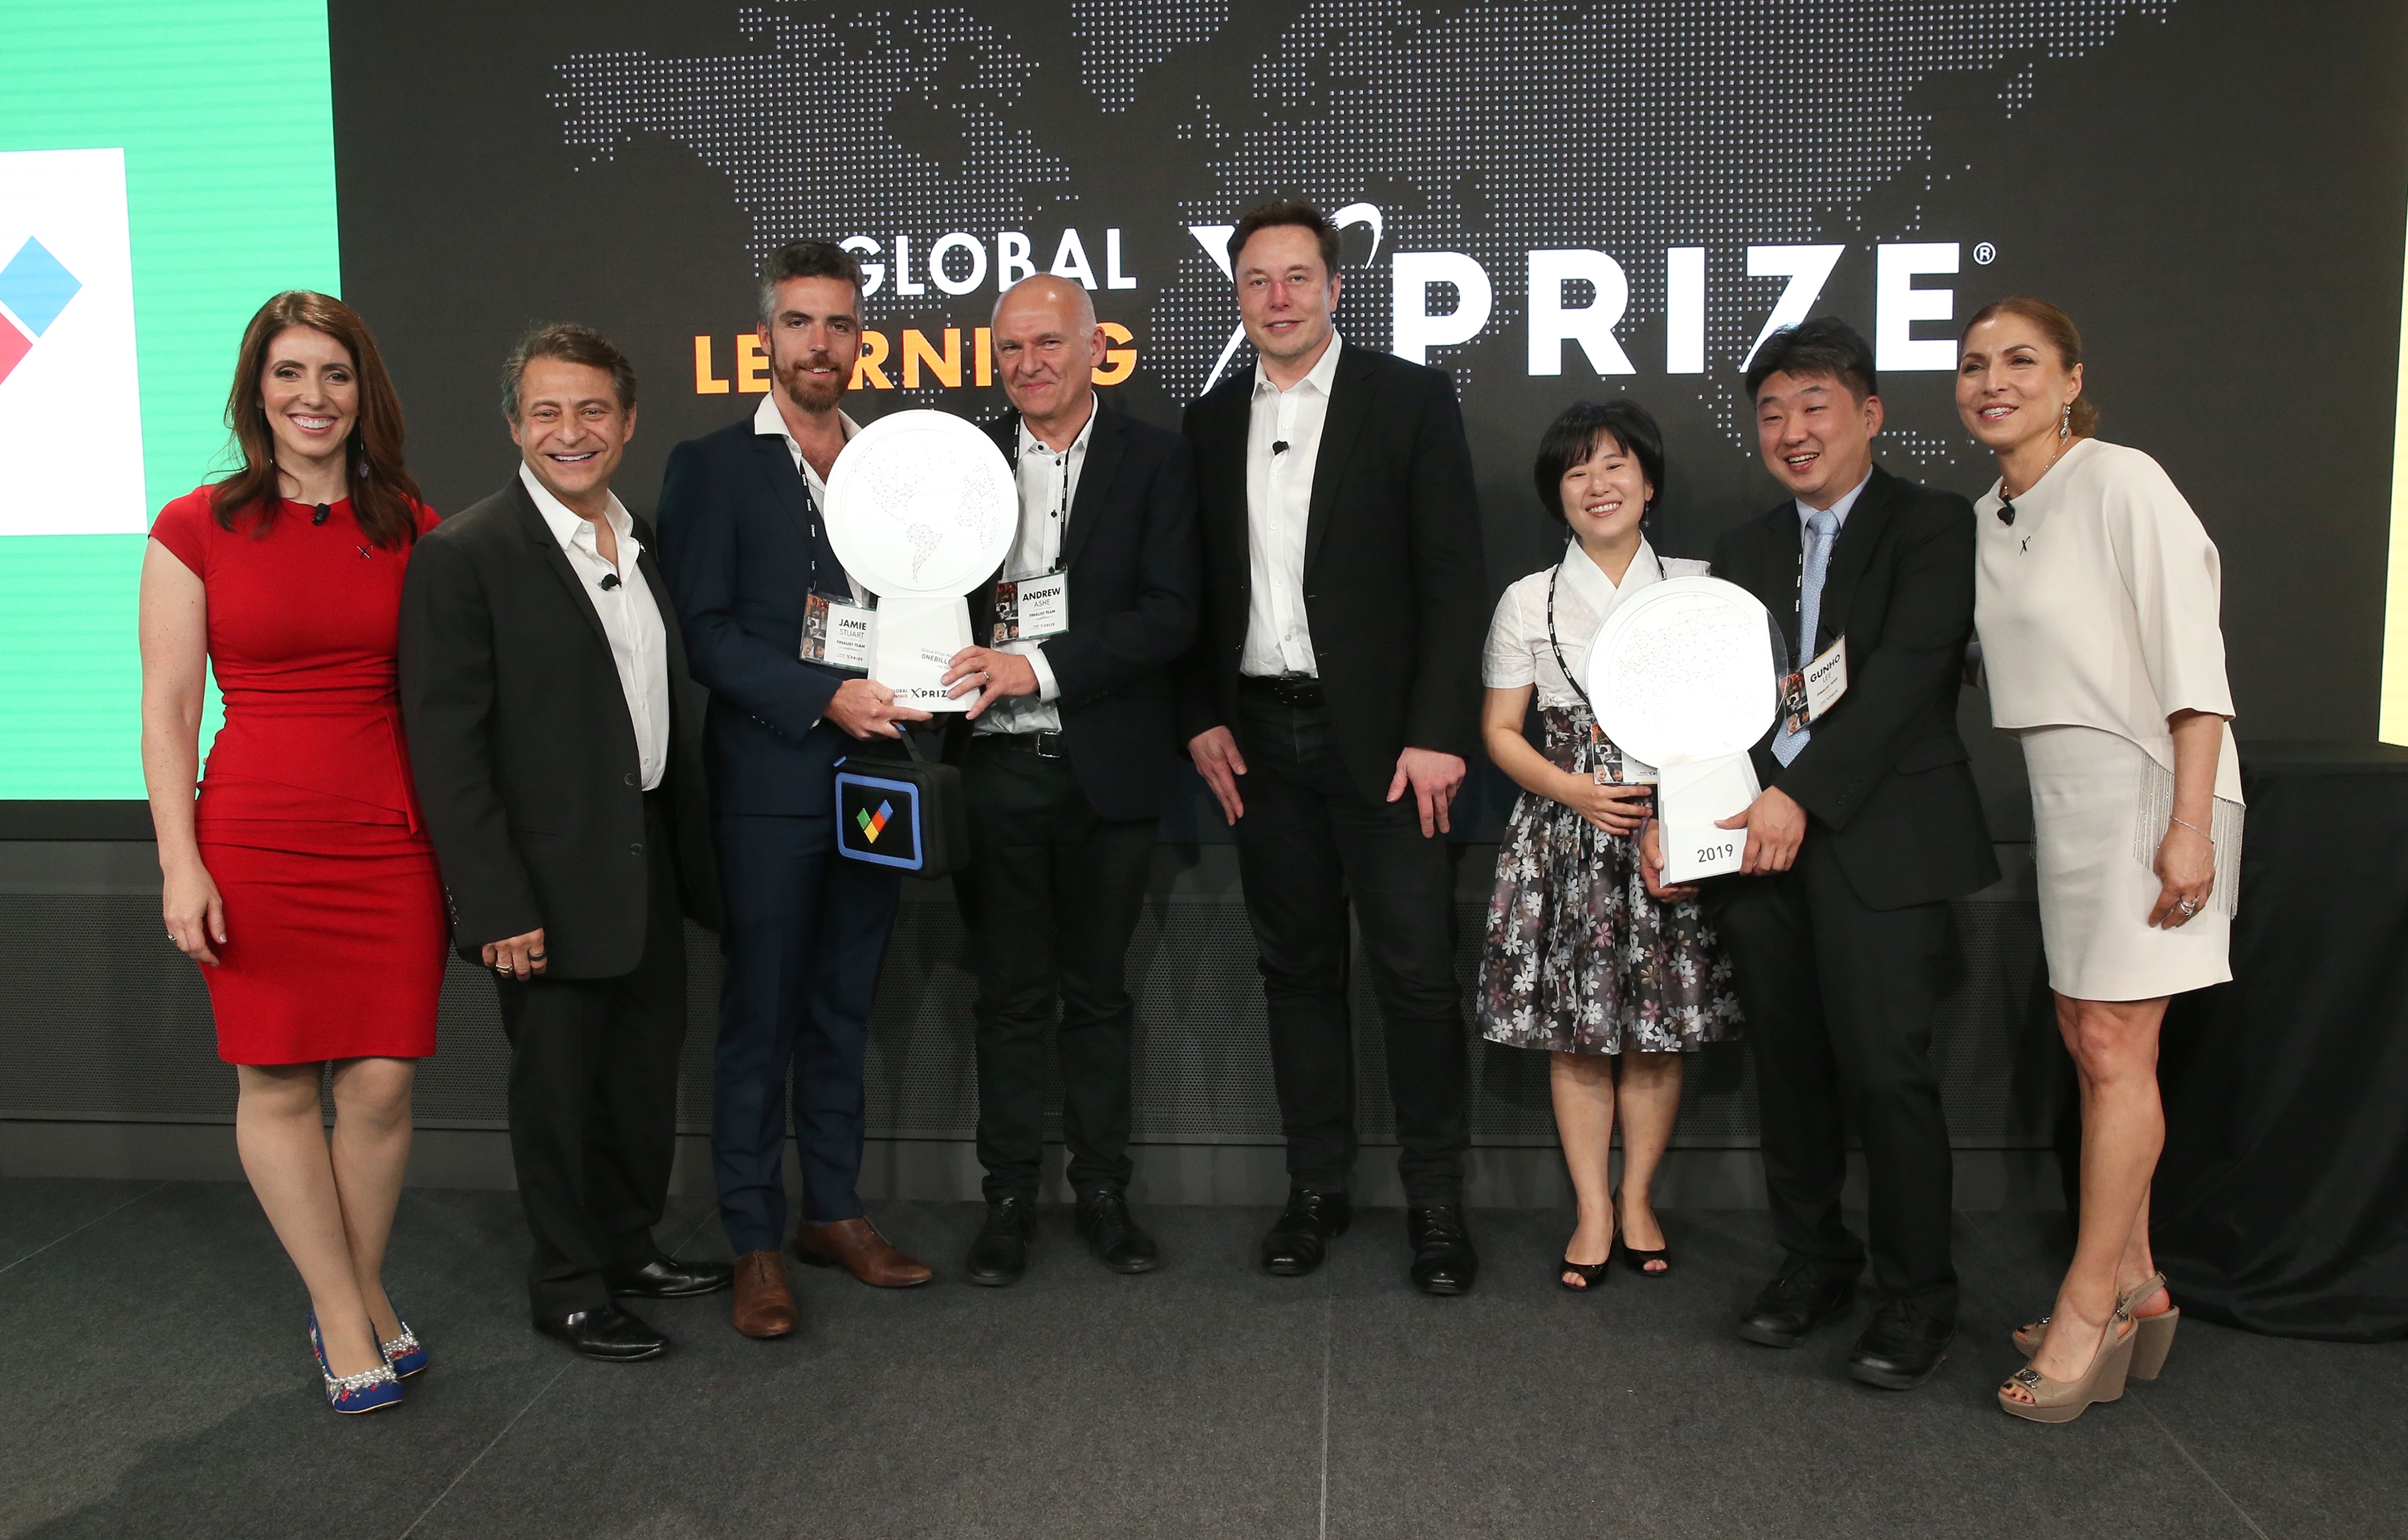 X-Prize CEO applaudes TVP during the Global Education Xprize awards ceremony hosted at the Google’s offices in Los Angeles, USA.